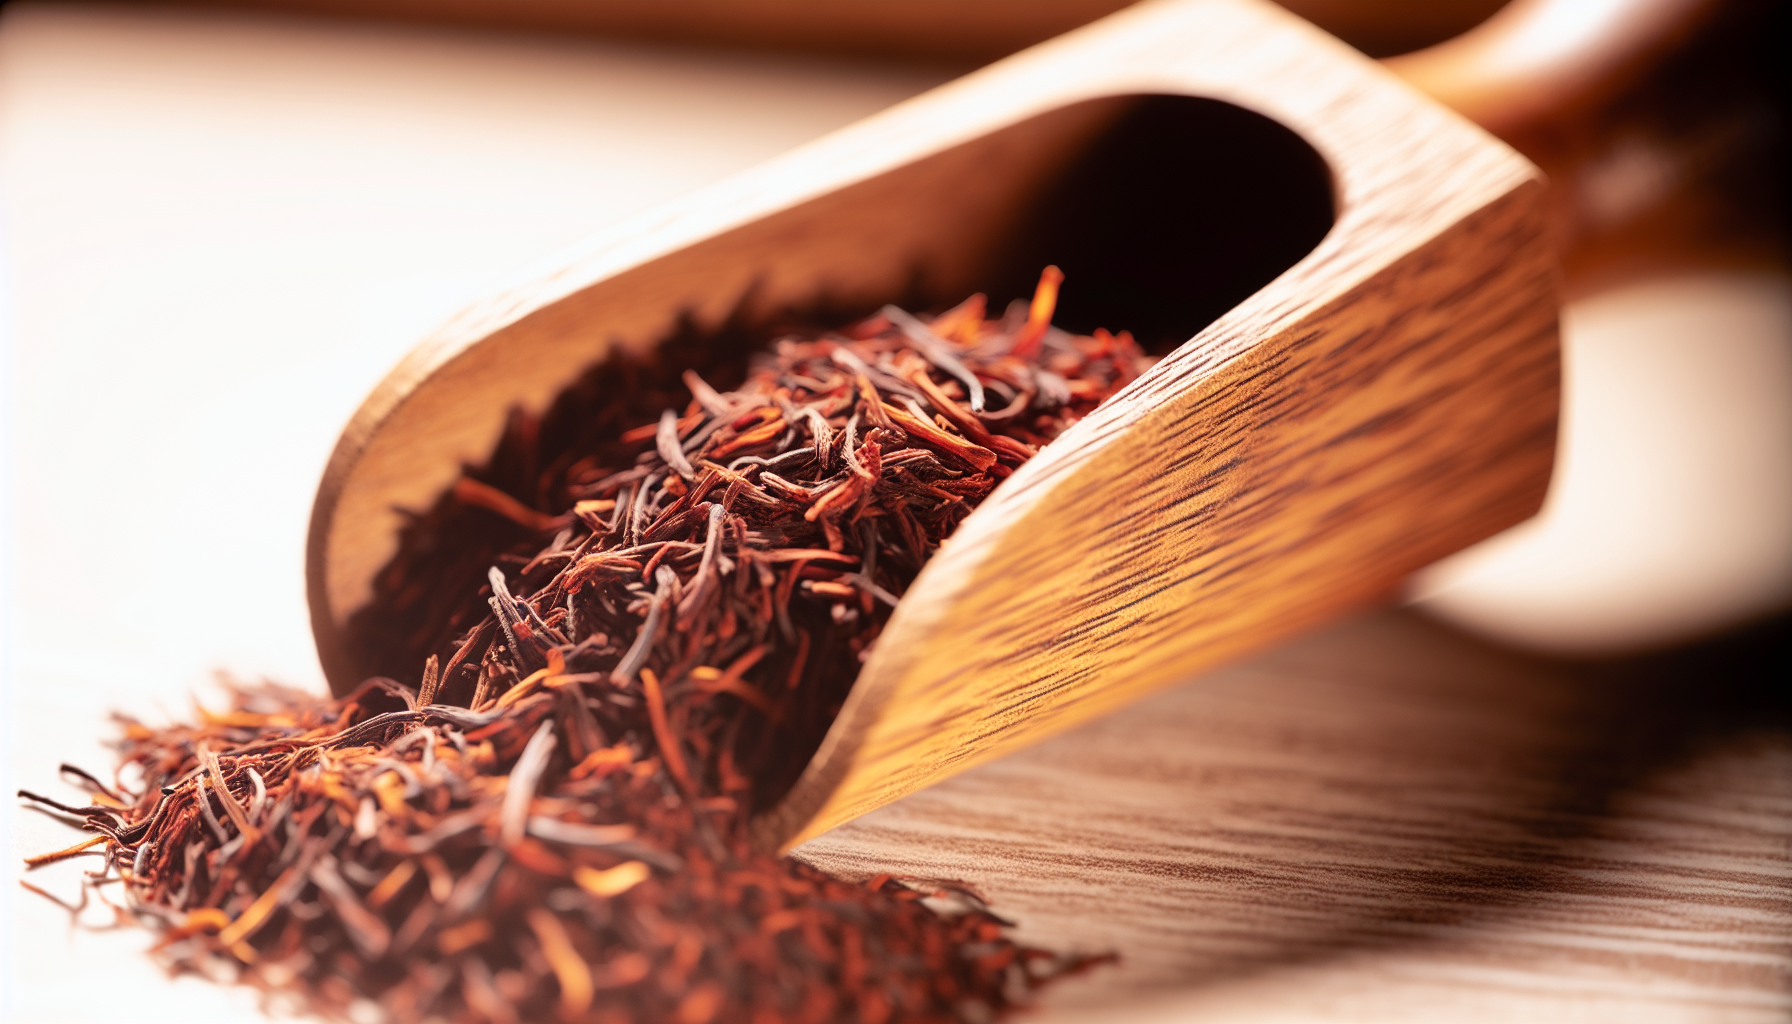 Rooibos tea leaves and a wooden scoop